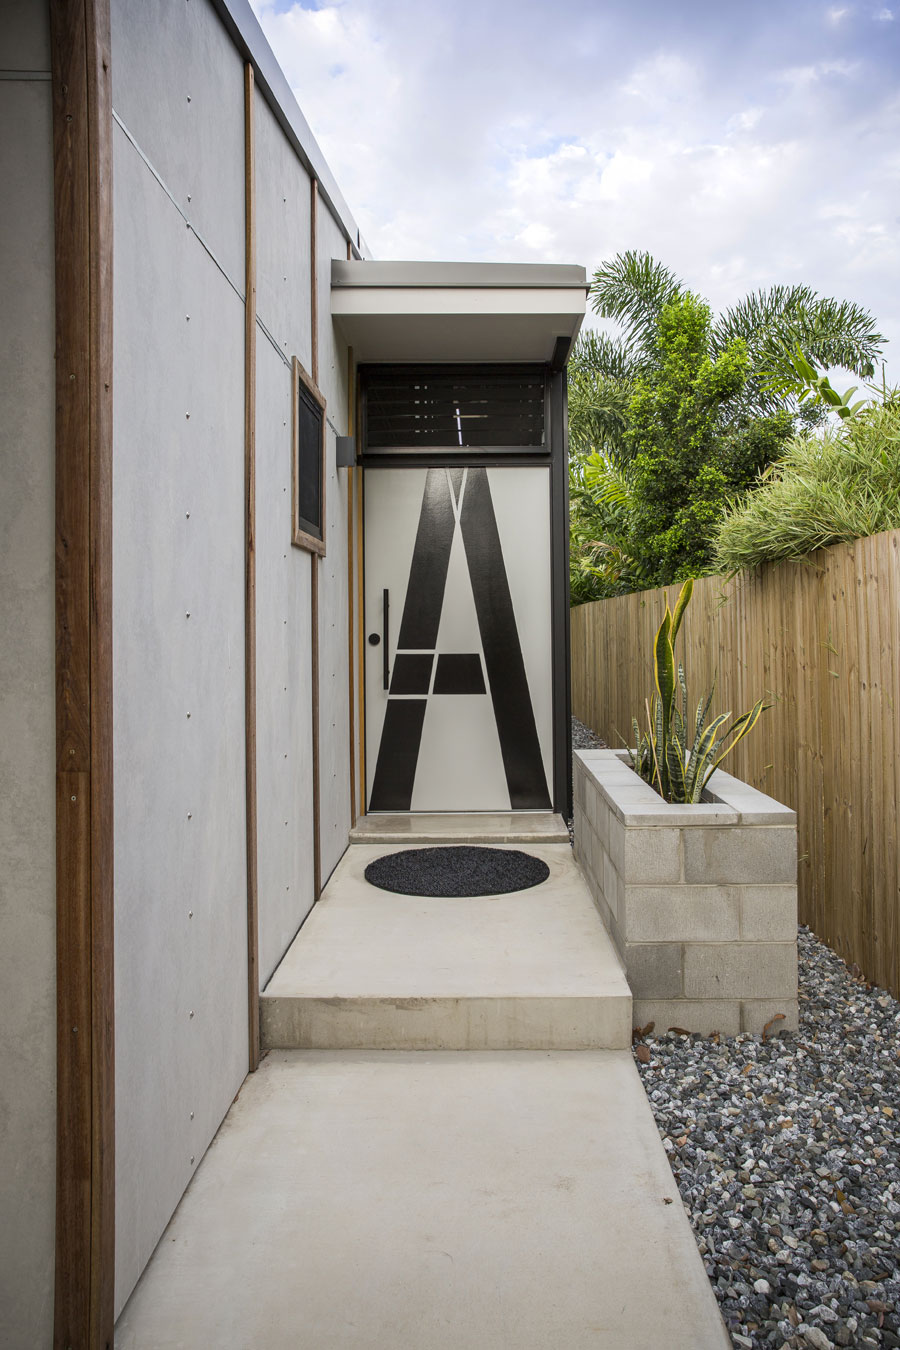 The side entry of Laneway house in Townsville unlocks the narrow floor plan and addresses its laneway condition. 